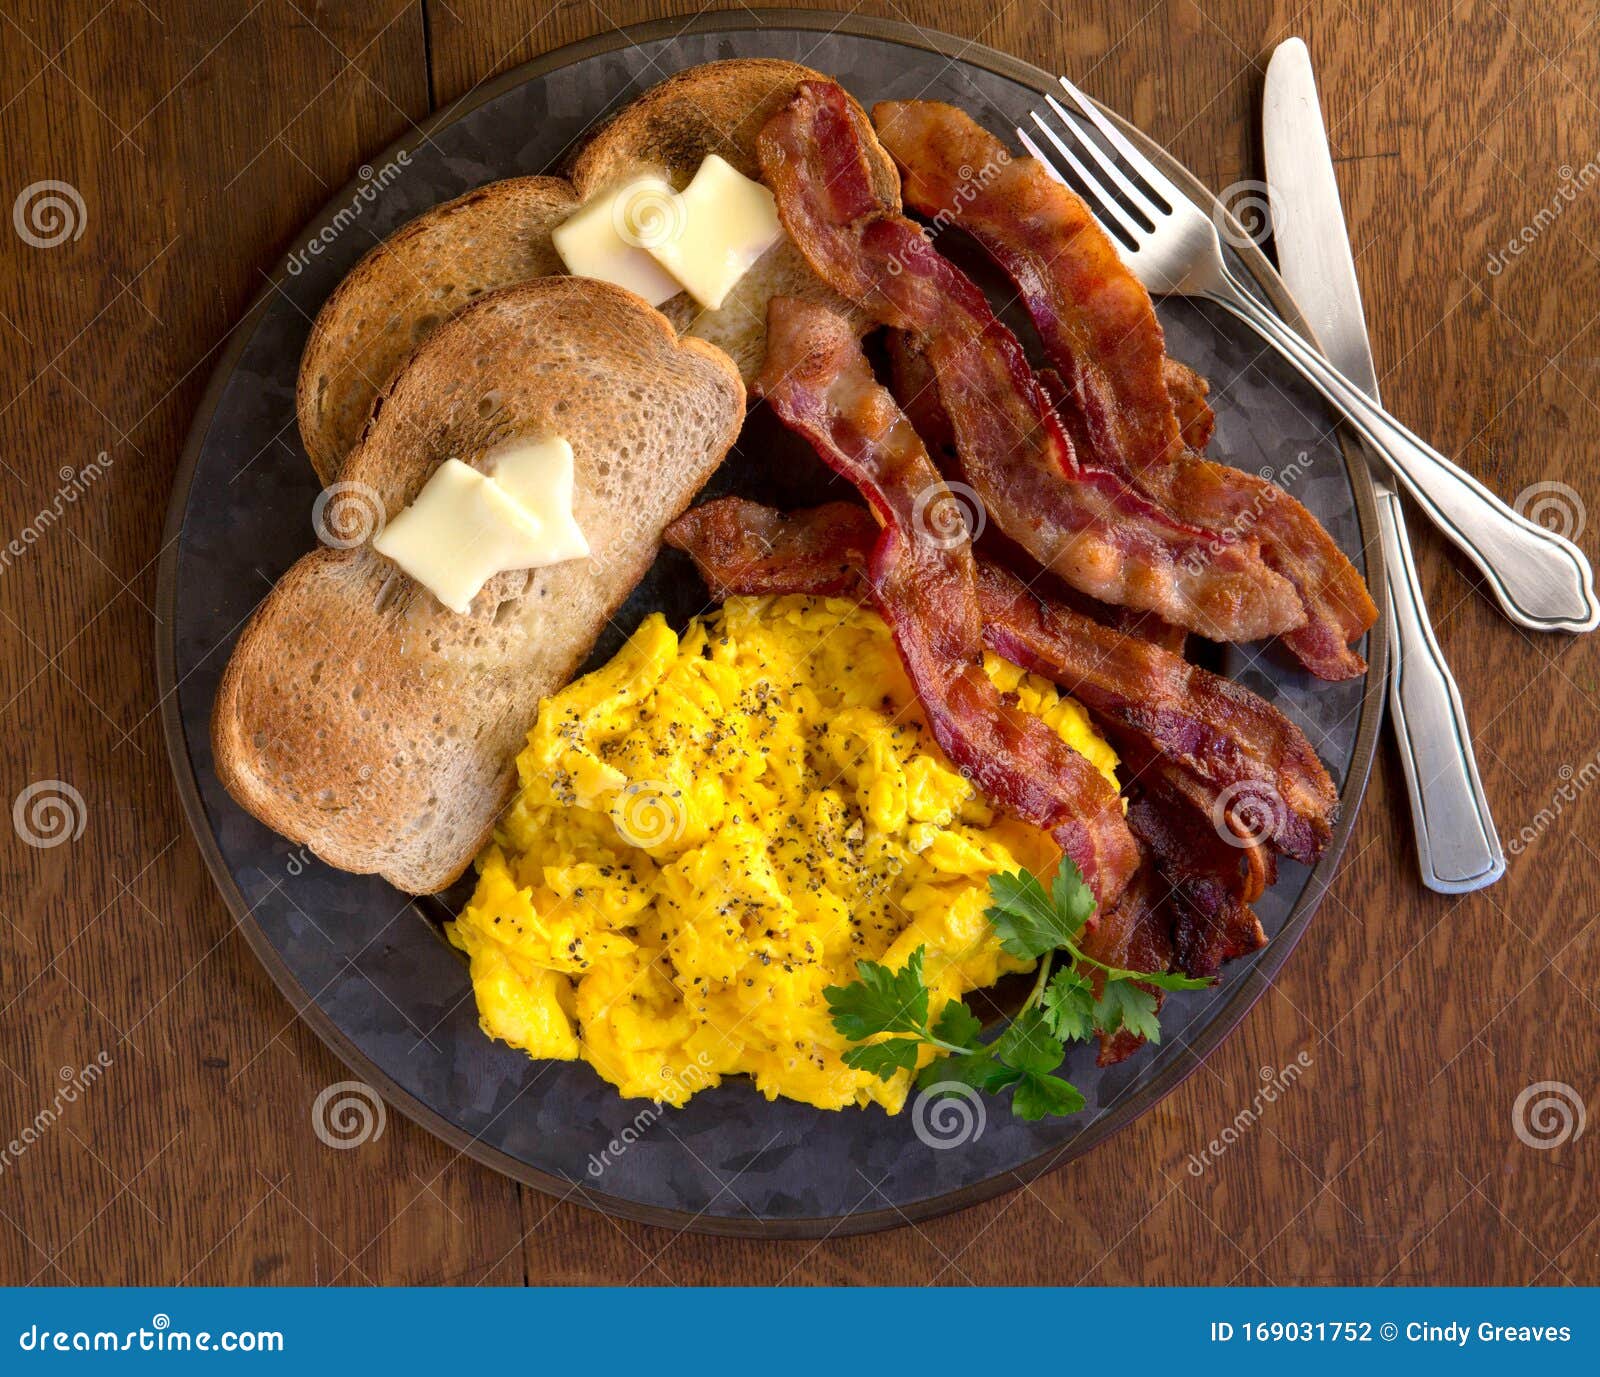 Srambled Eggs Bacon And Toast Plated On A Wood Table Stock Photo Image Of Breakfast Hearty